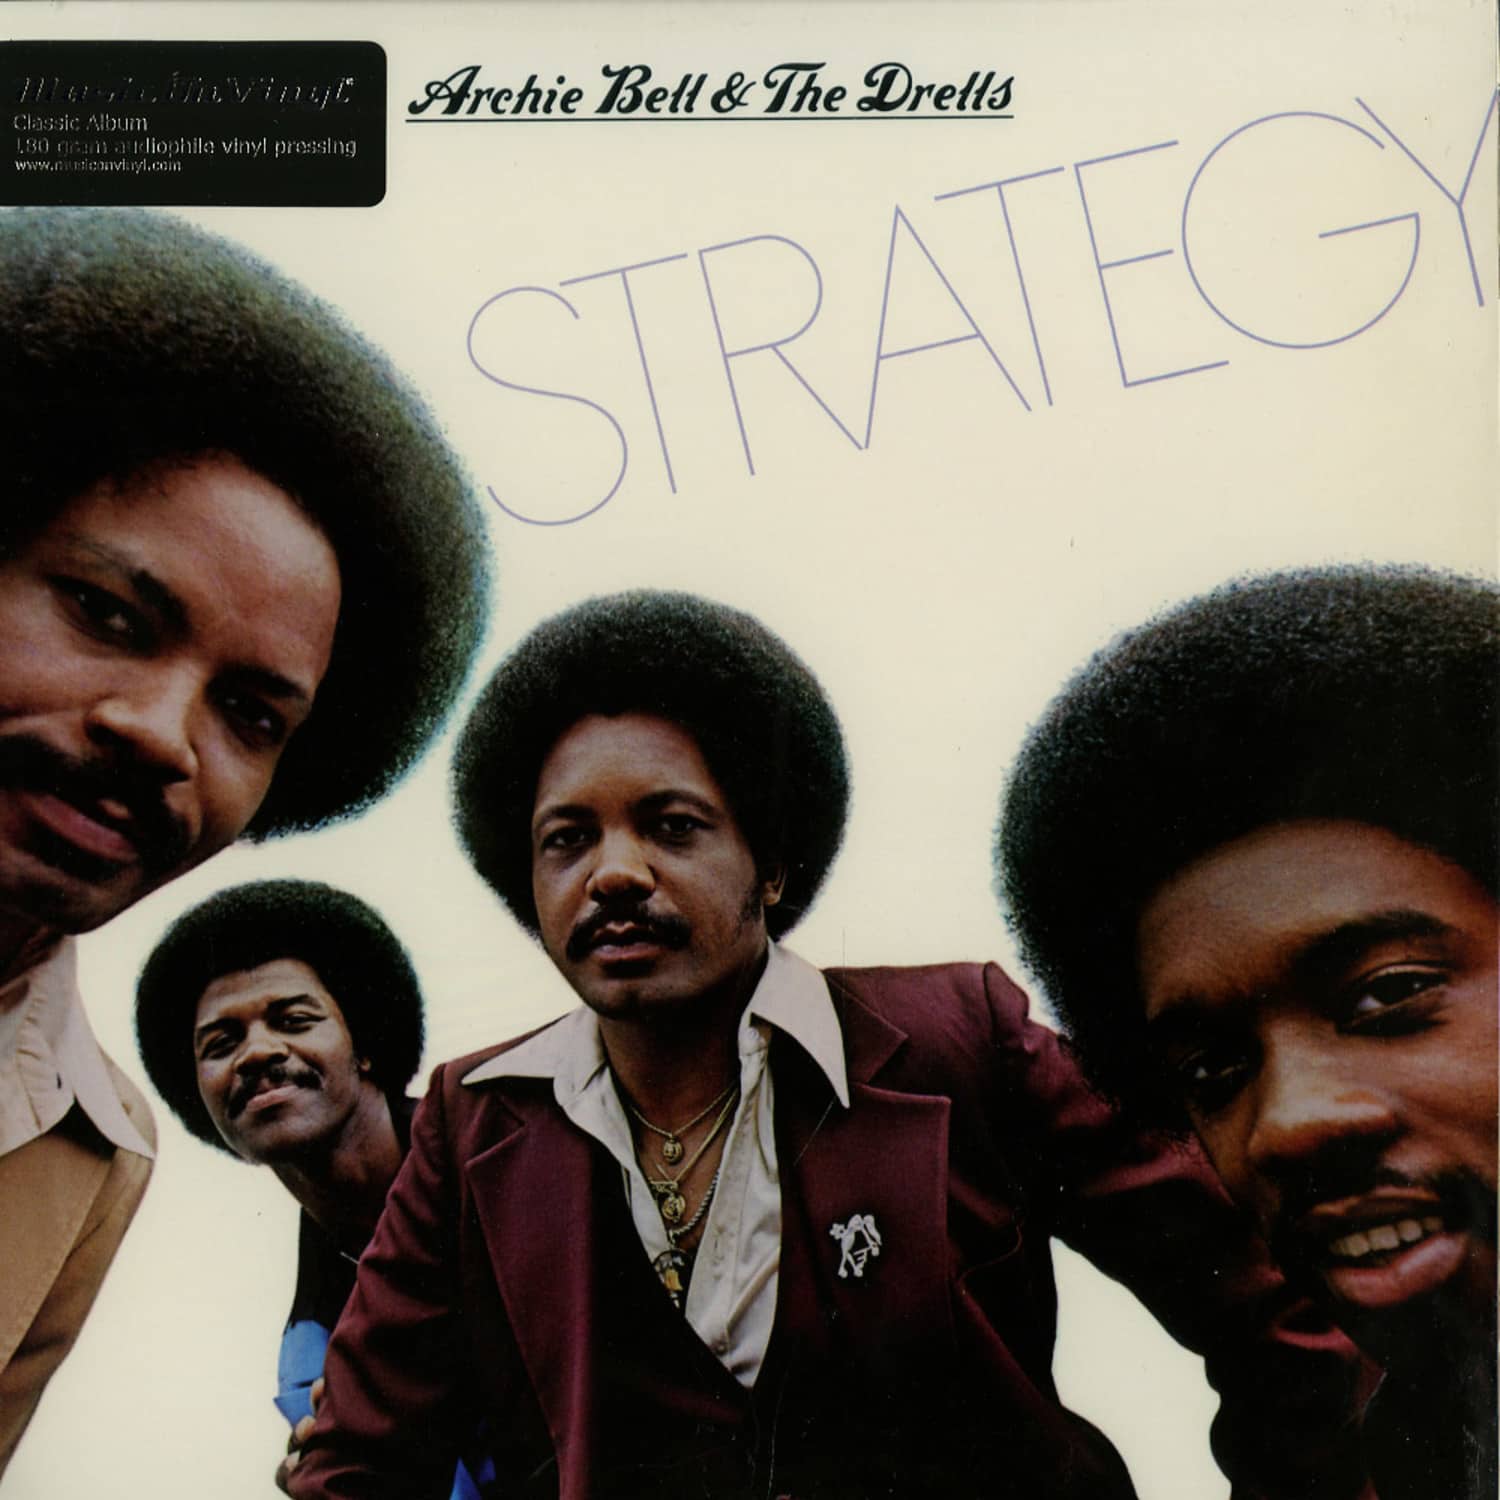 Archie Bell & The Dells - STRATEGY 